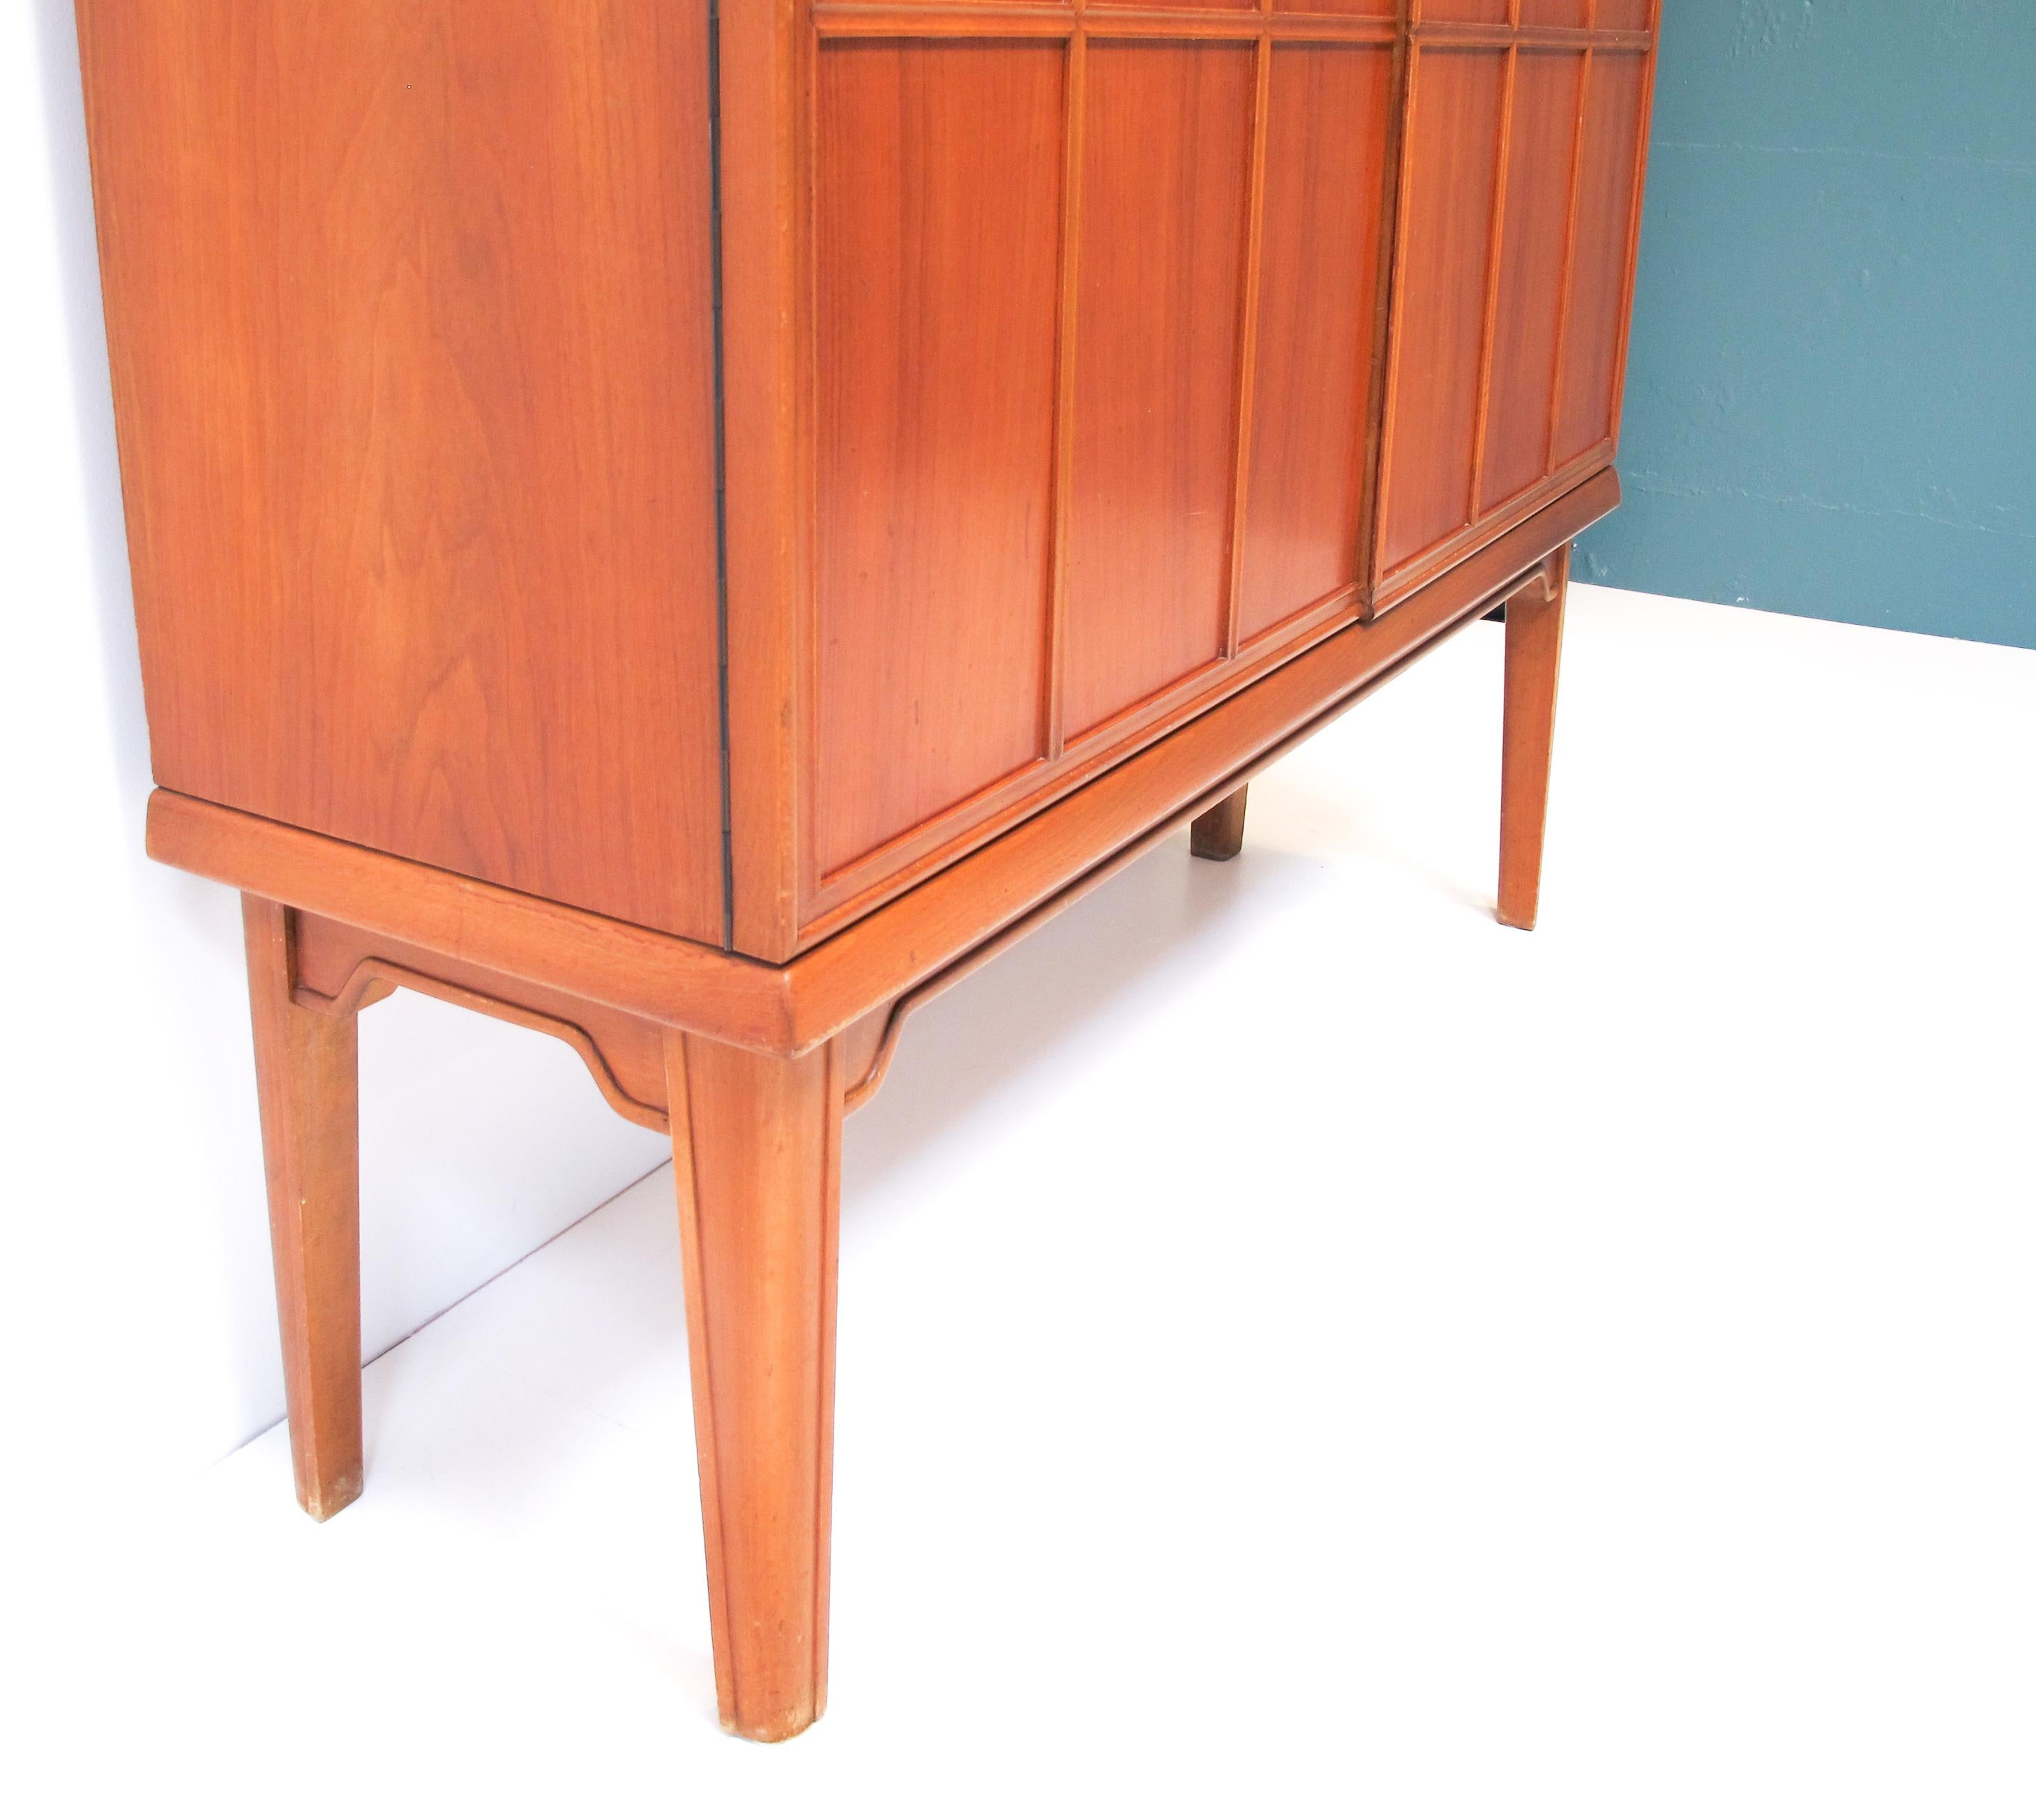 Cabinet Swedish modern with relief doors. 1940s
The cabinet have removable shelves.